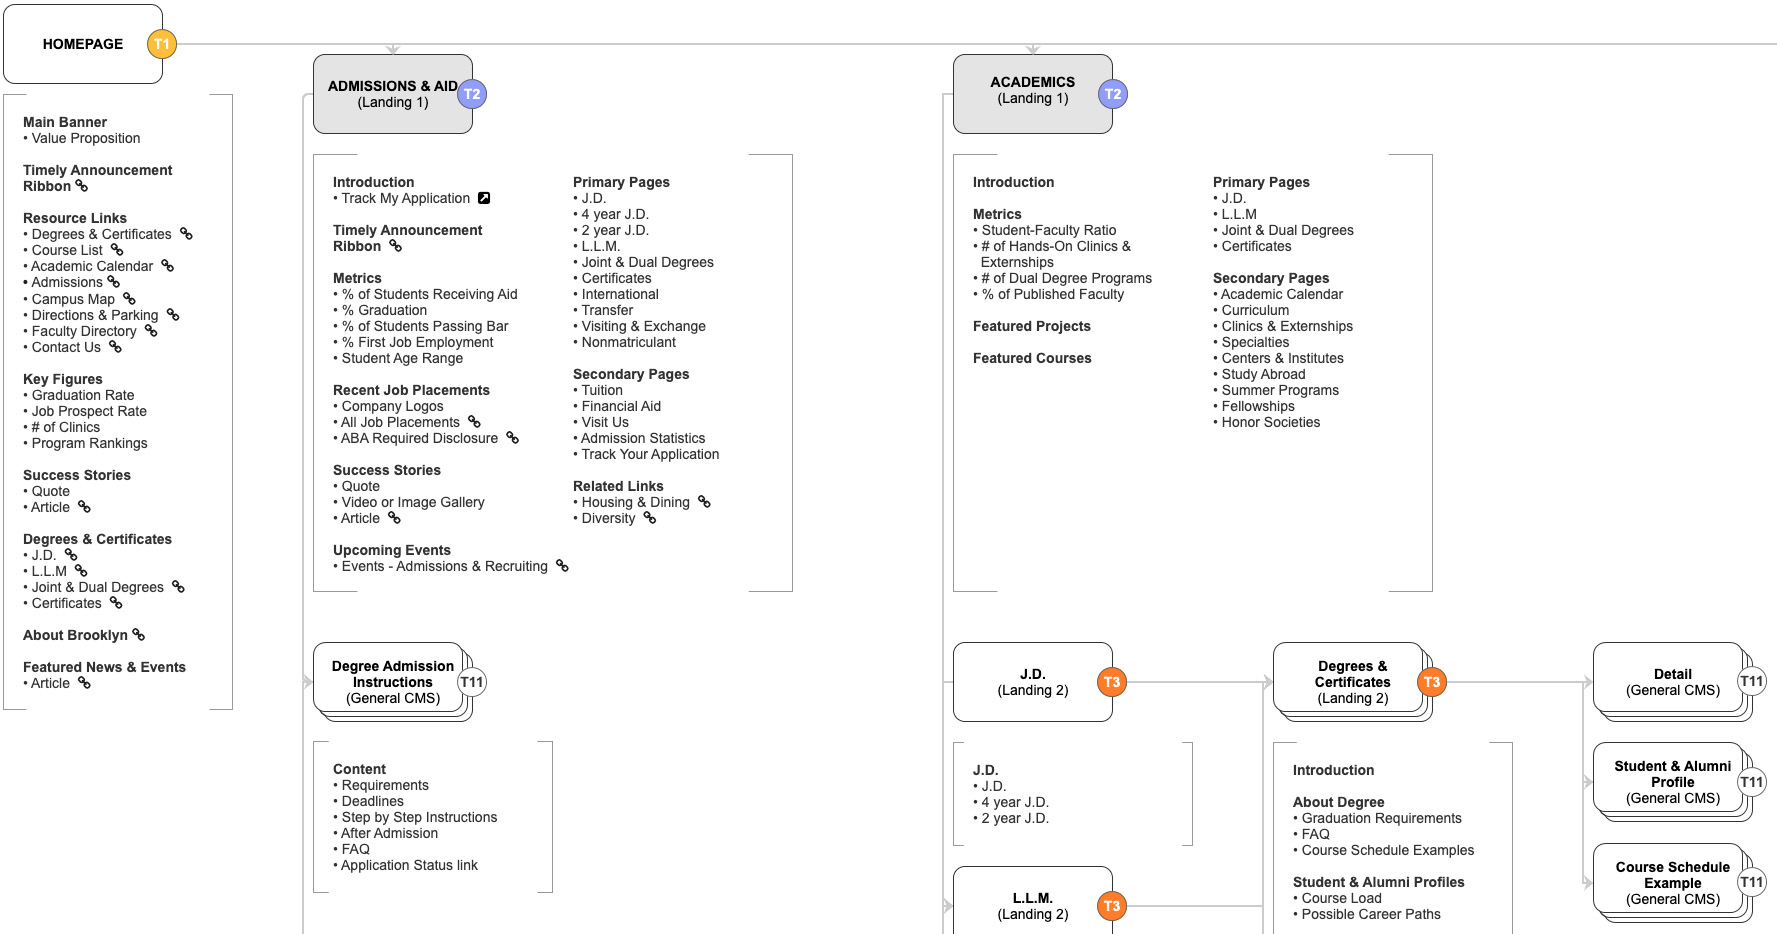 Sitemap with content outlined under each page.